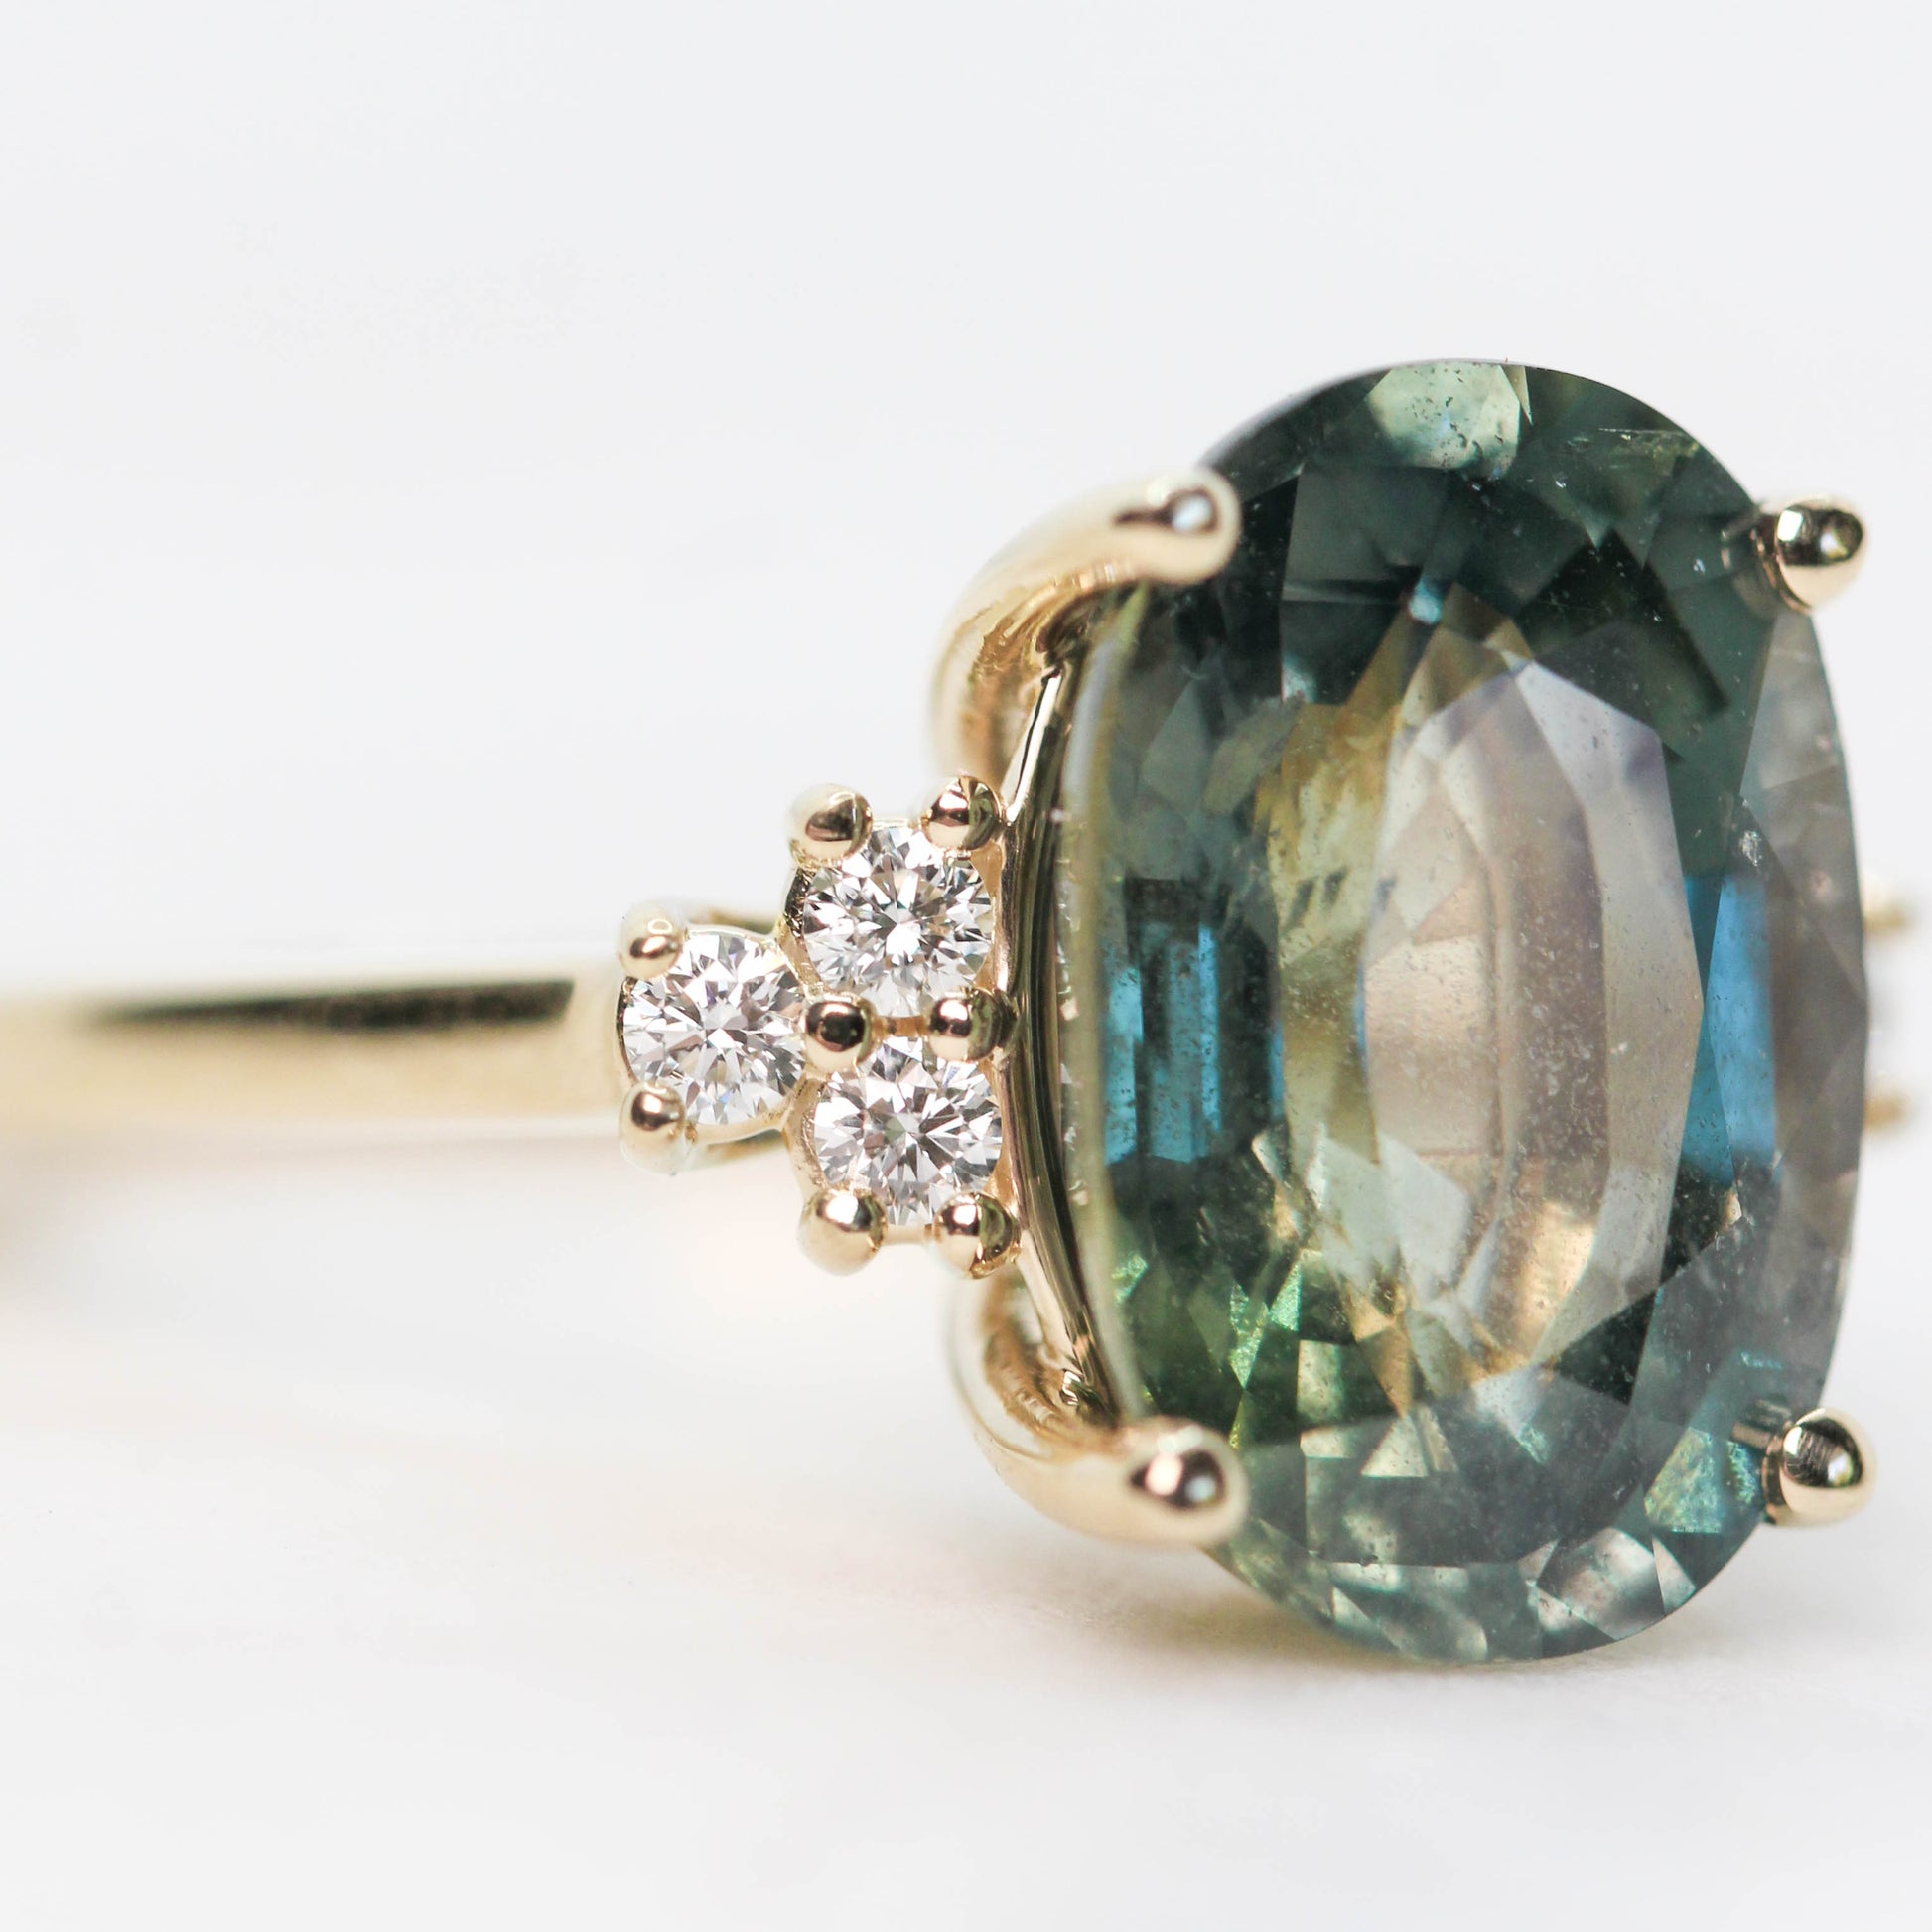 Veragene Ring with a 10.48 Carat Blue Green Oval Sapphire and White Accent Diamonds in 14k Yellow Gold - Ready to Size and Ship - Midwinter Co. Alternative Bridal Rings and Modern Fine Jewelry